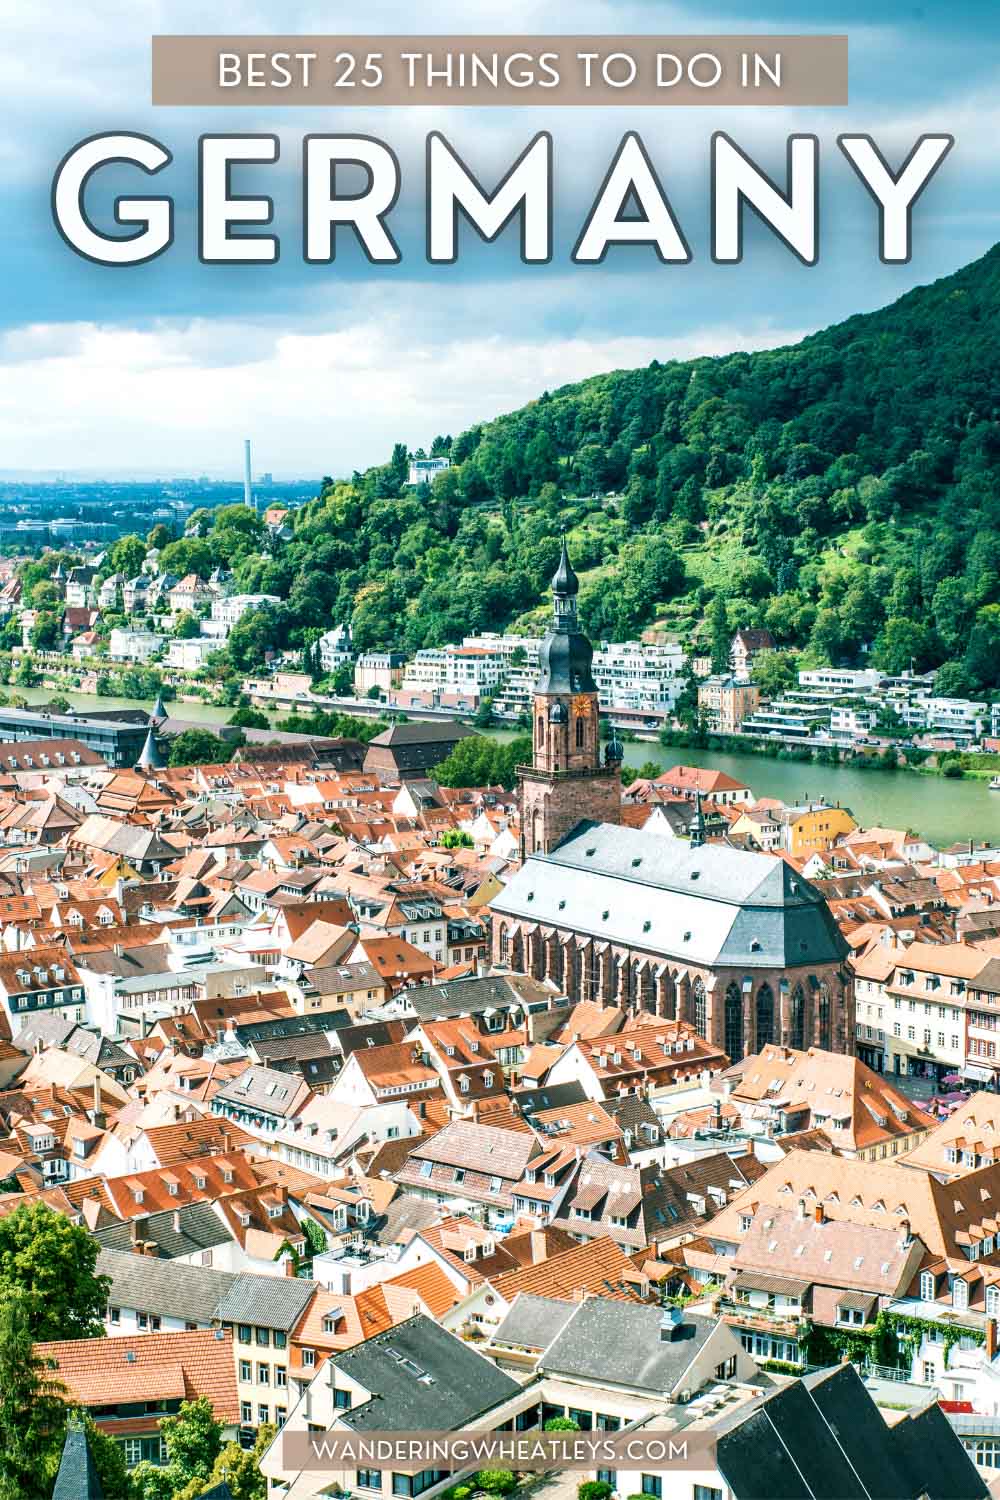 The Best Things to do in Germany